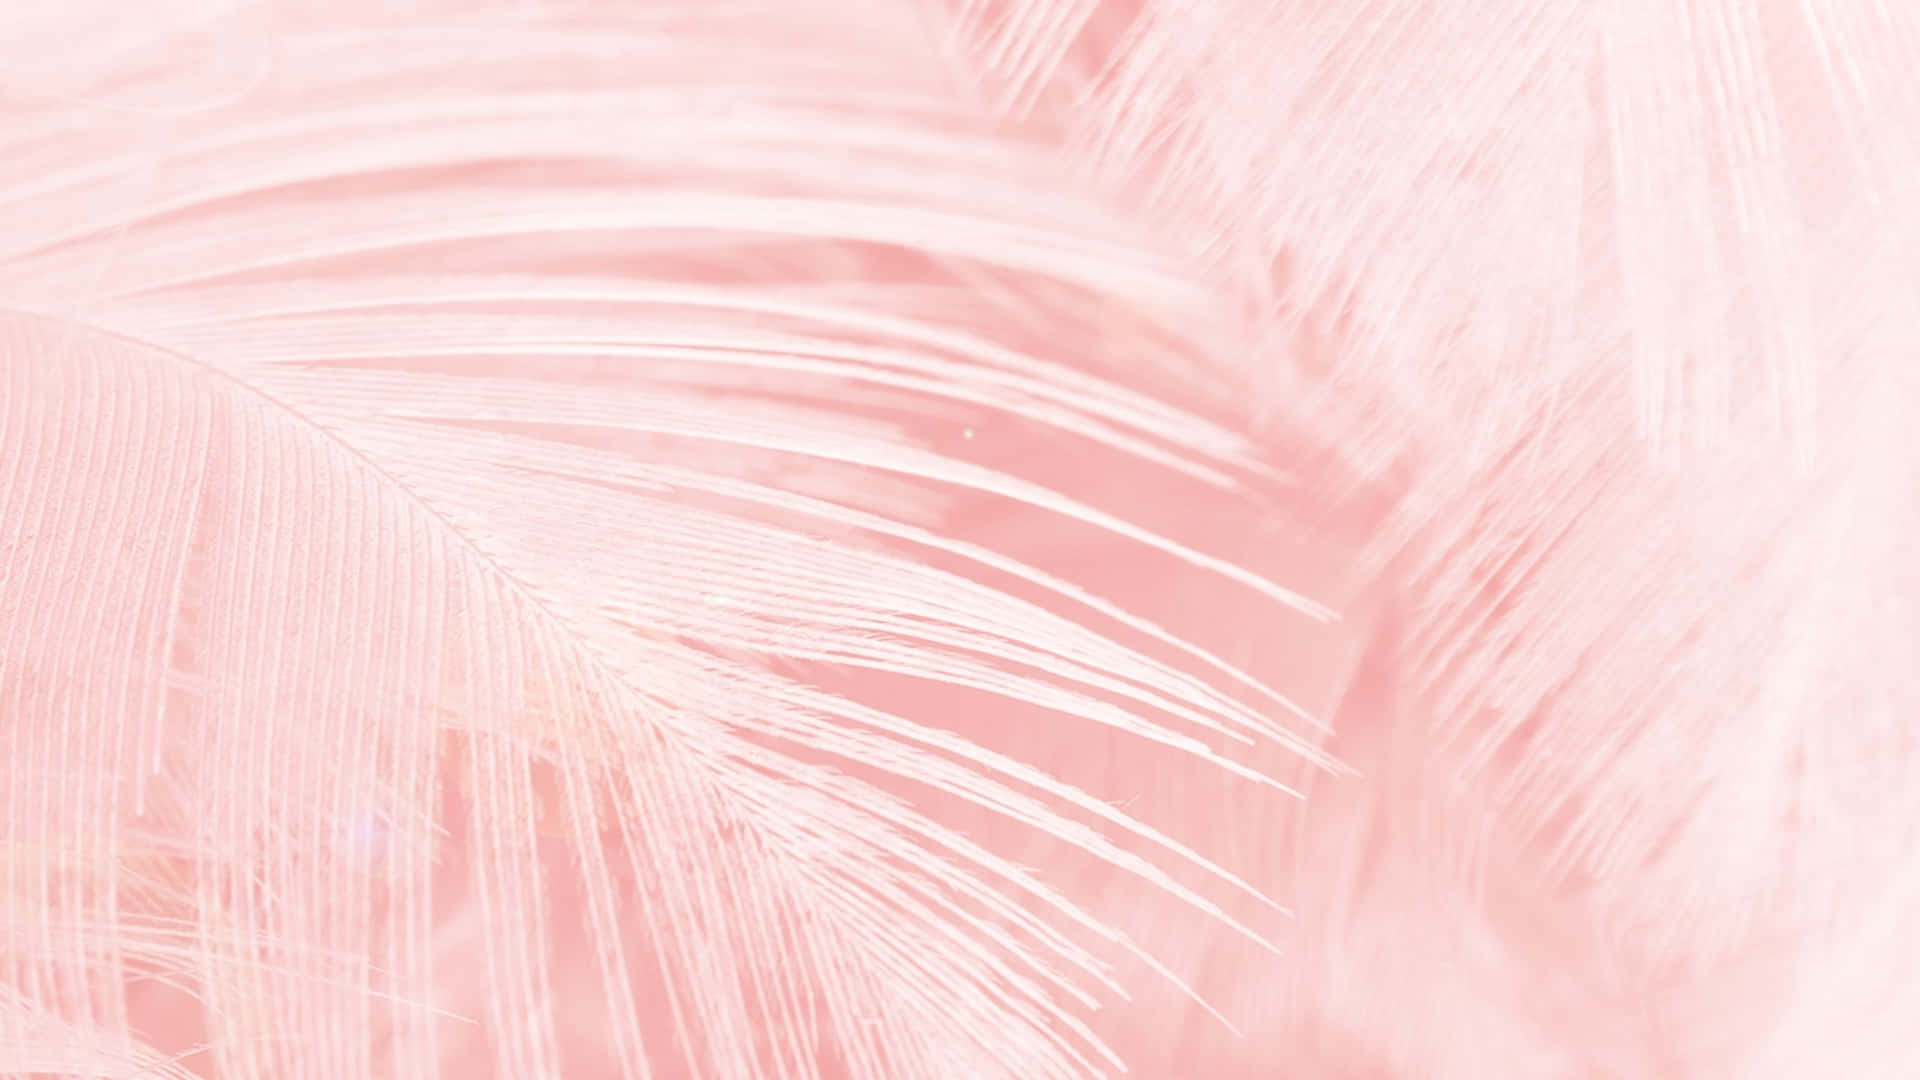 Download Aesthetic Computer Light Pink Feathers Wallpaper